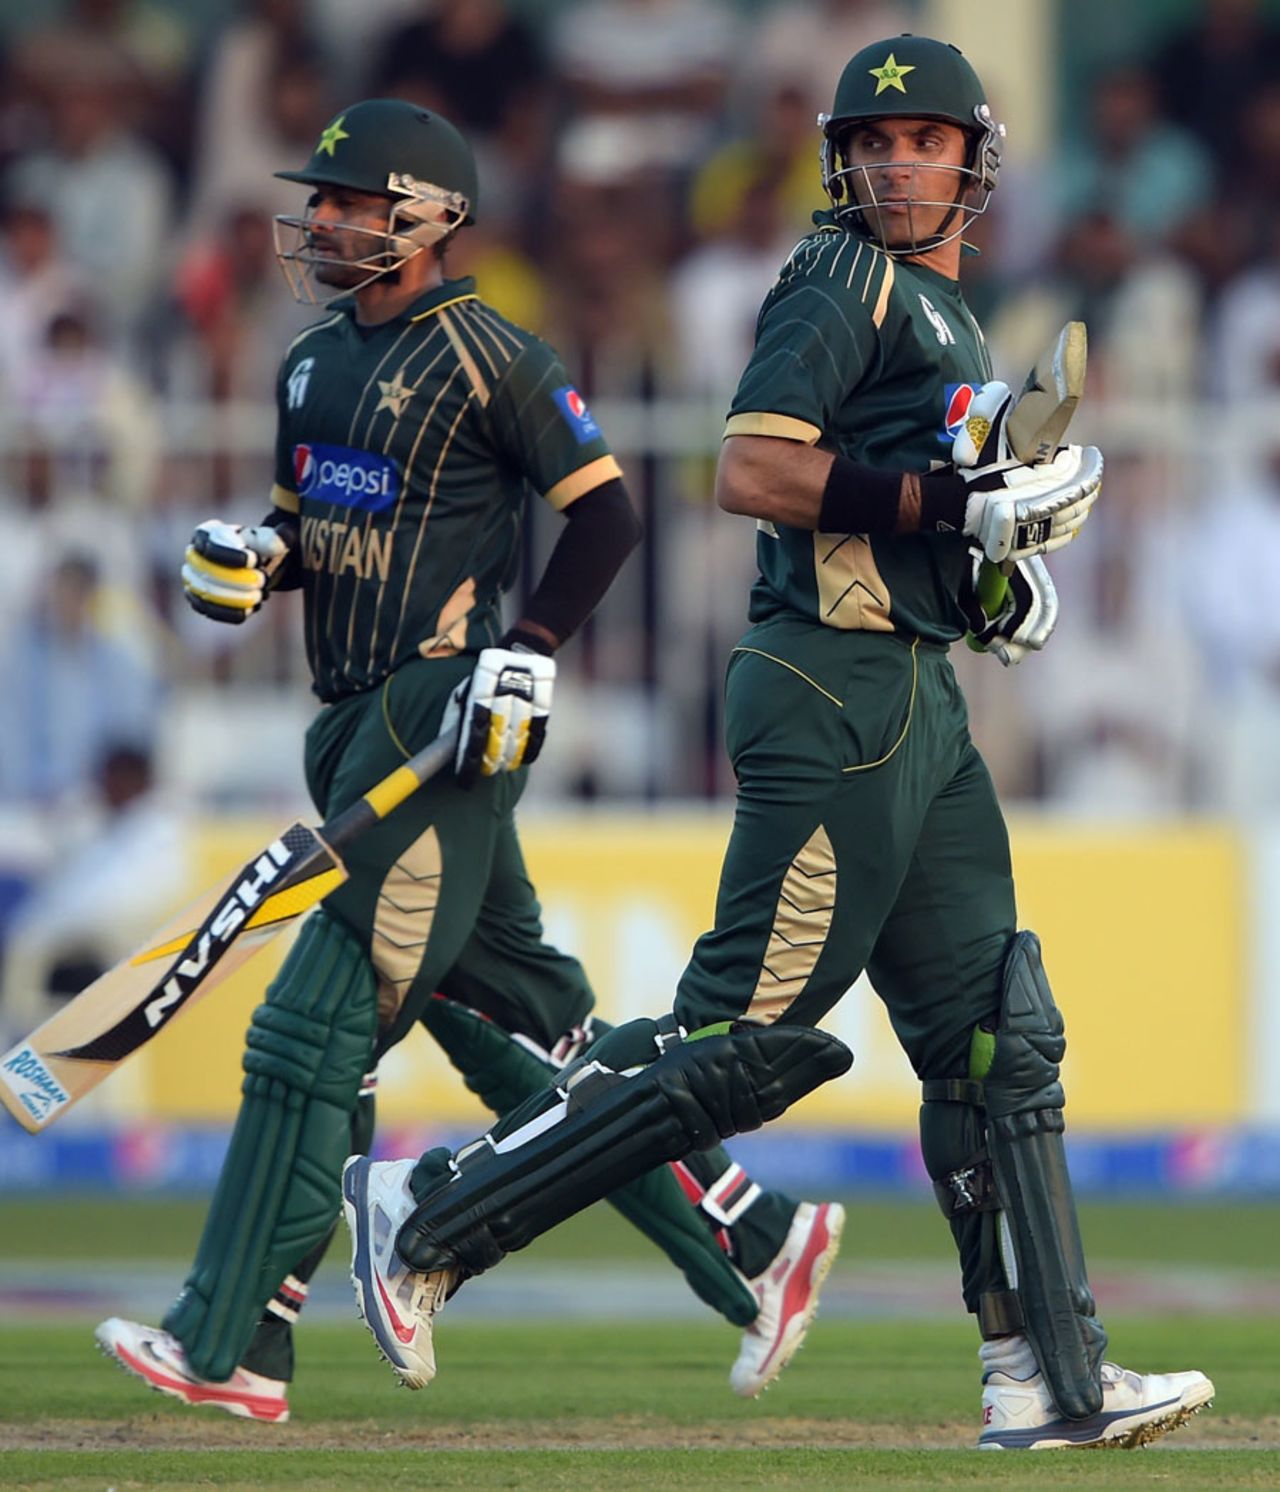 Mohammad Hafeez and Misbah-ul-Haq added 66 for the fifth wicket , Pakistan v New Zealand, 2nd ODI, Sharjah, December 12, 2014